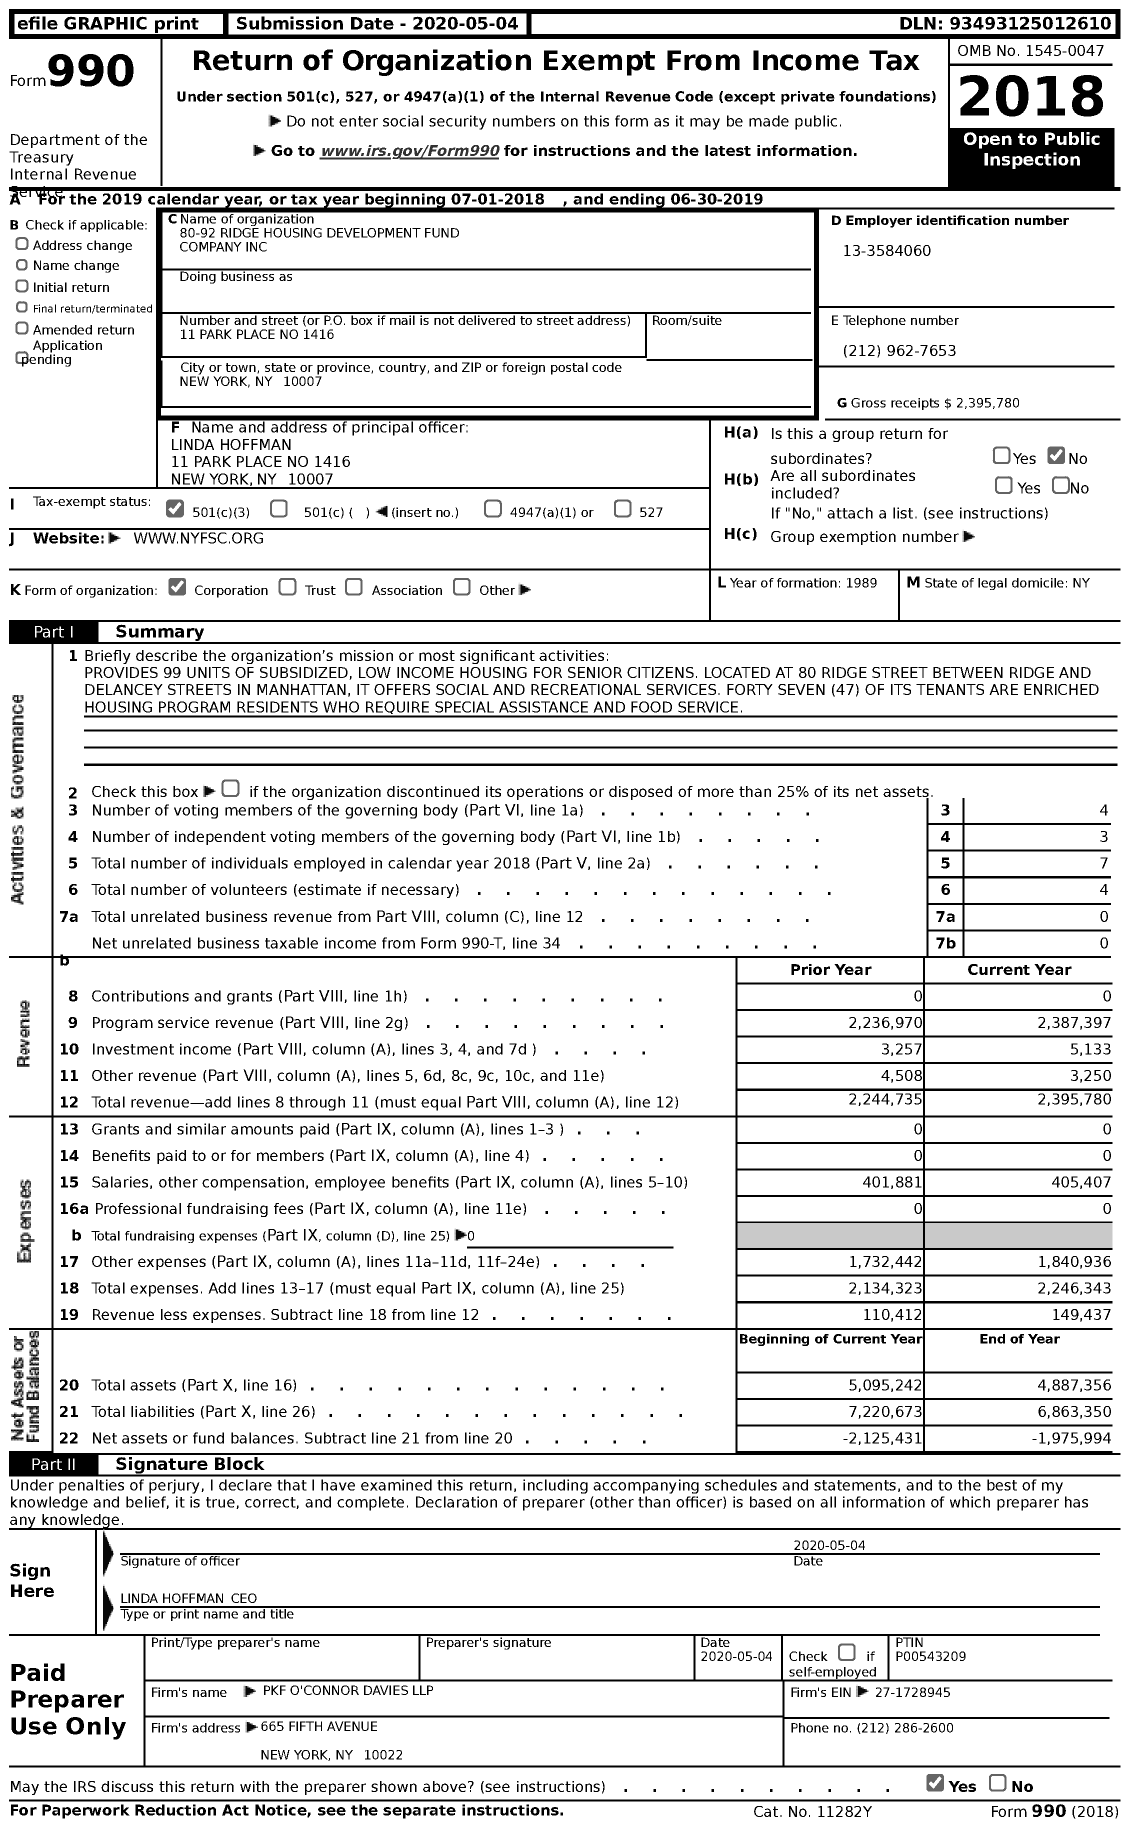 Image of first page of 2018 Form 990 for 80-92 Ridge Street Housing Development Fund Company